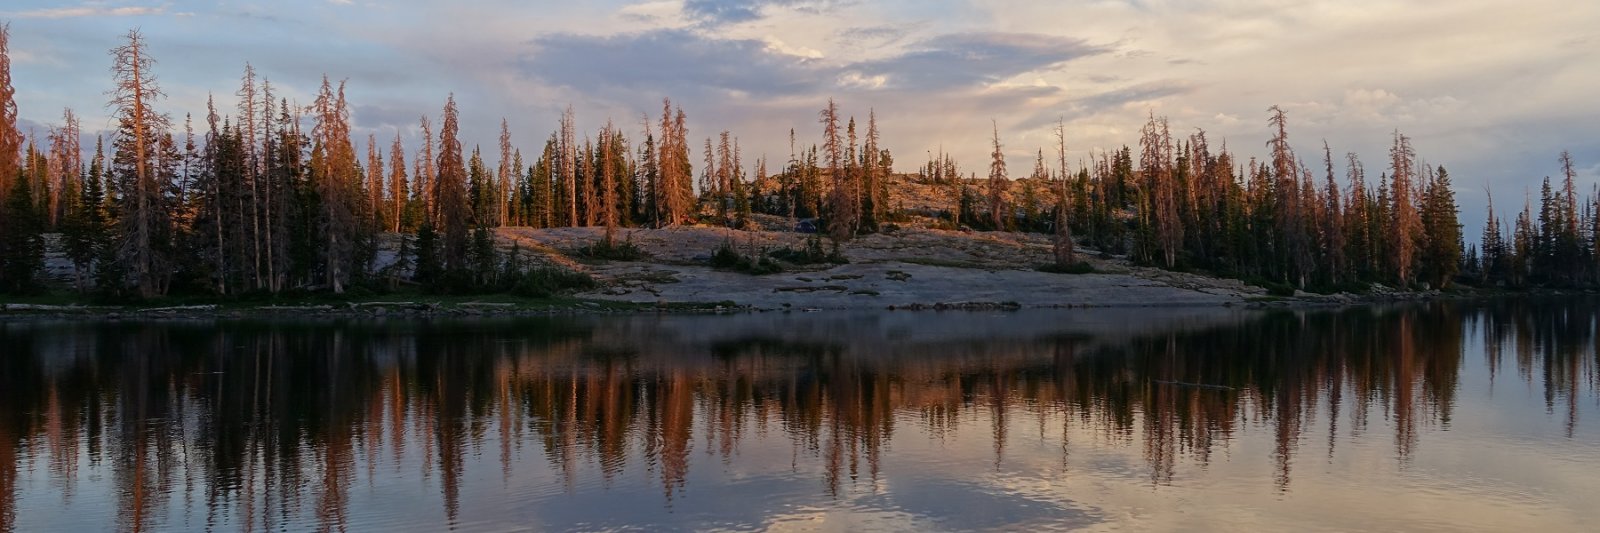 lake at sunset with pine trees